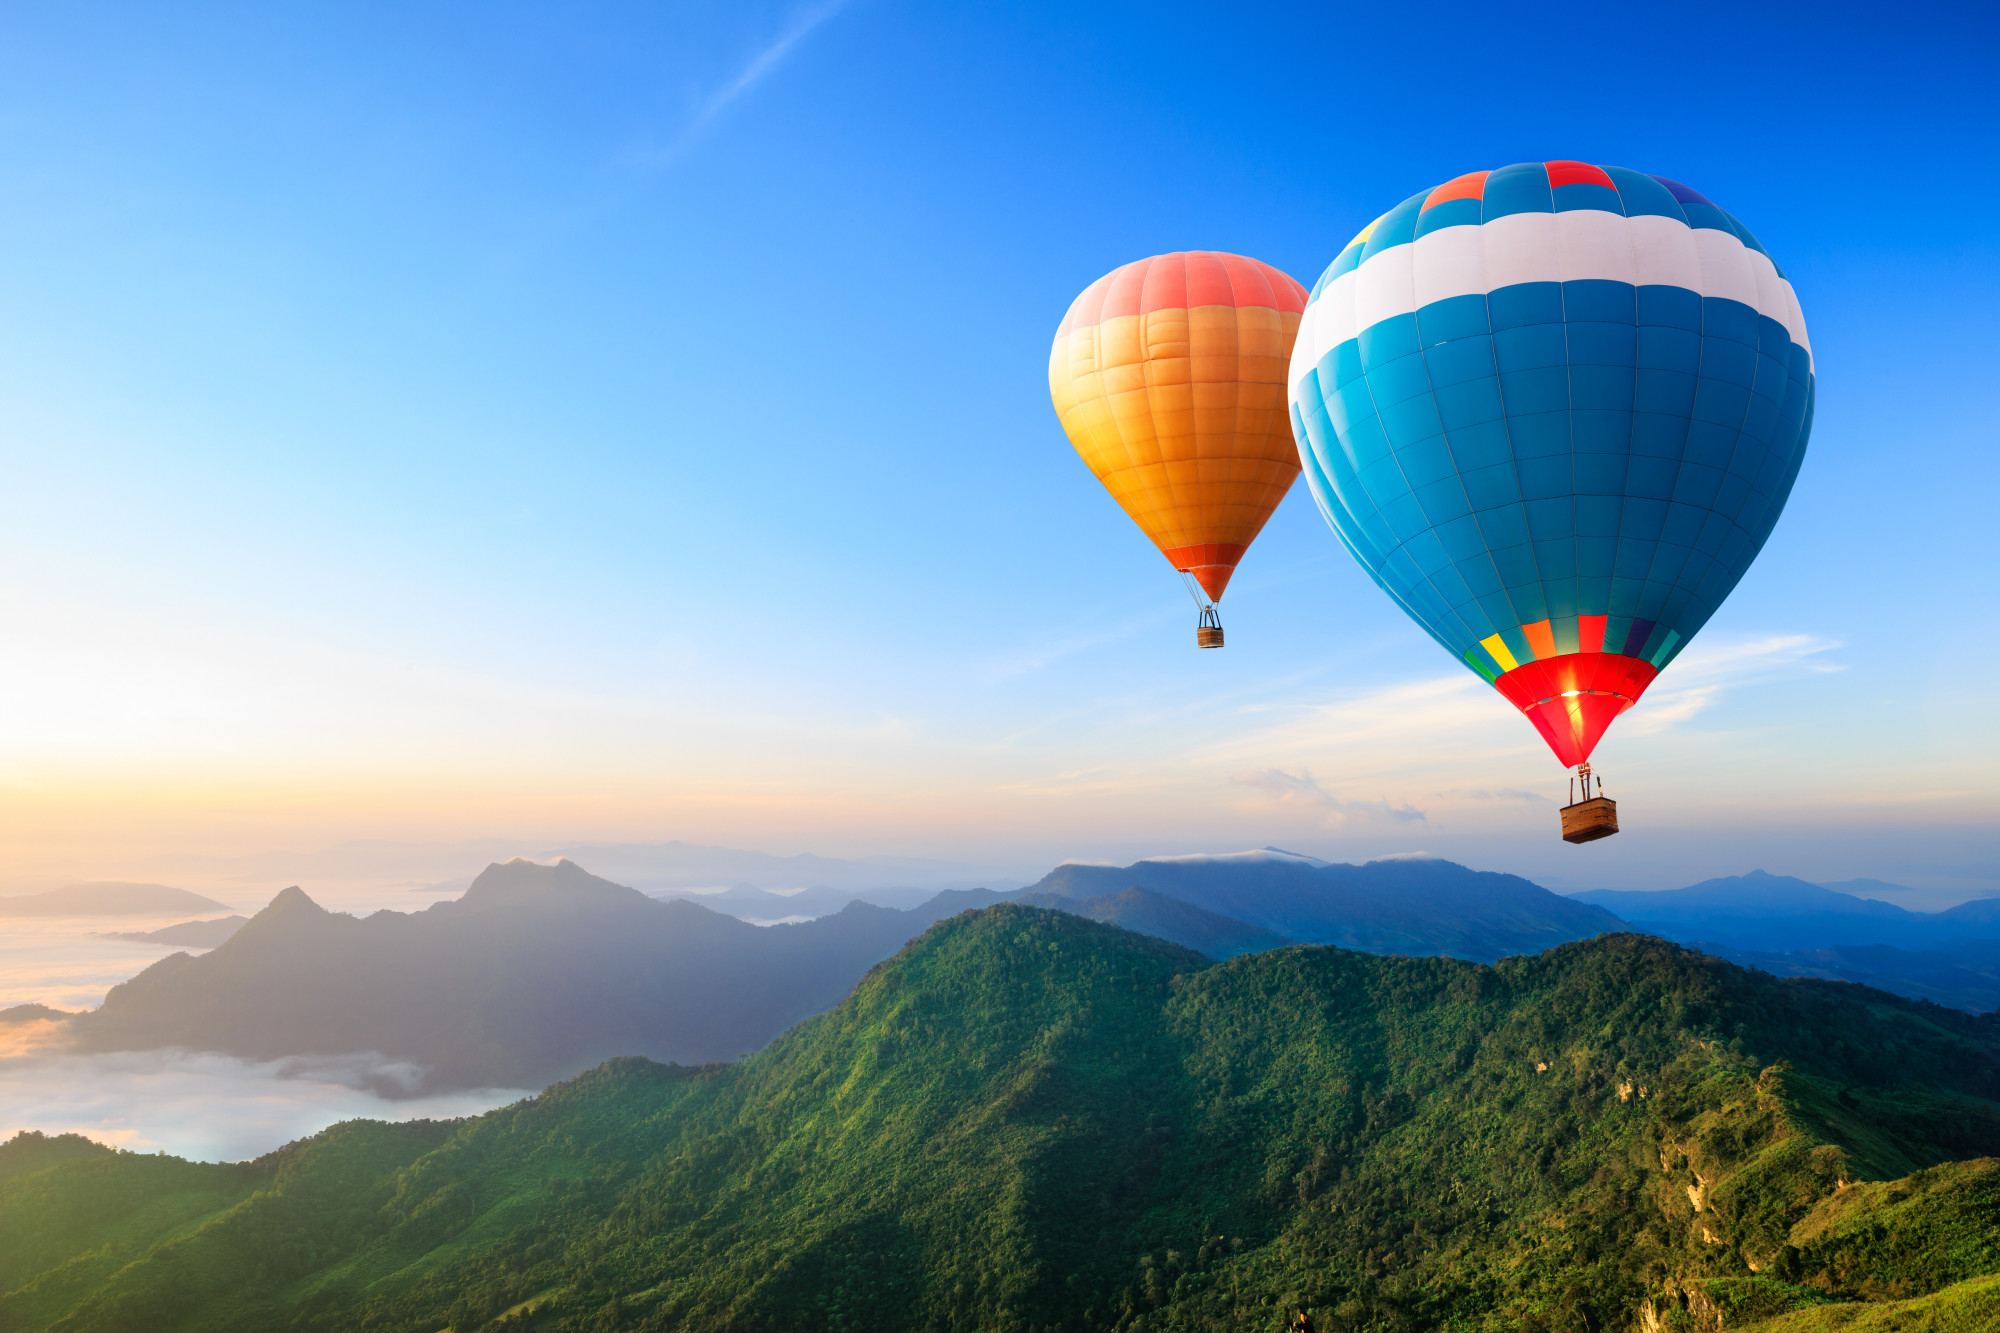 Fly High: 9 Tips for First-Time Hot Air Balloon Riders